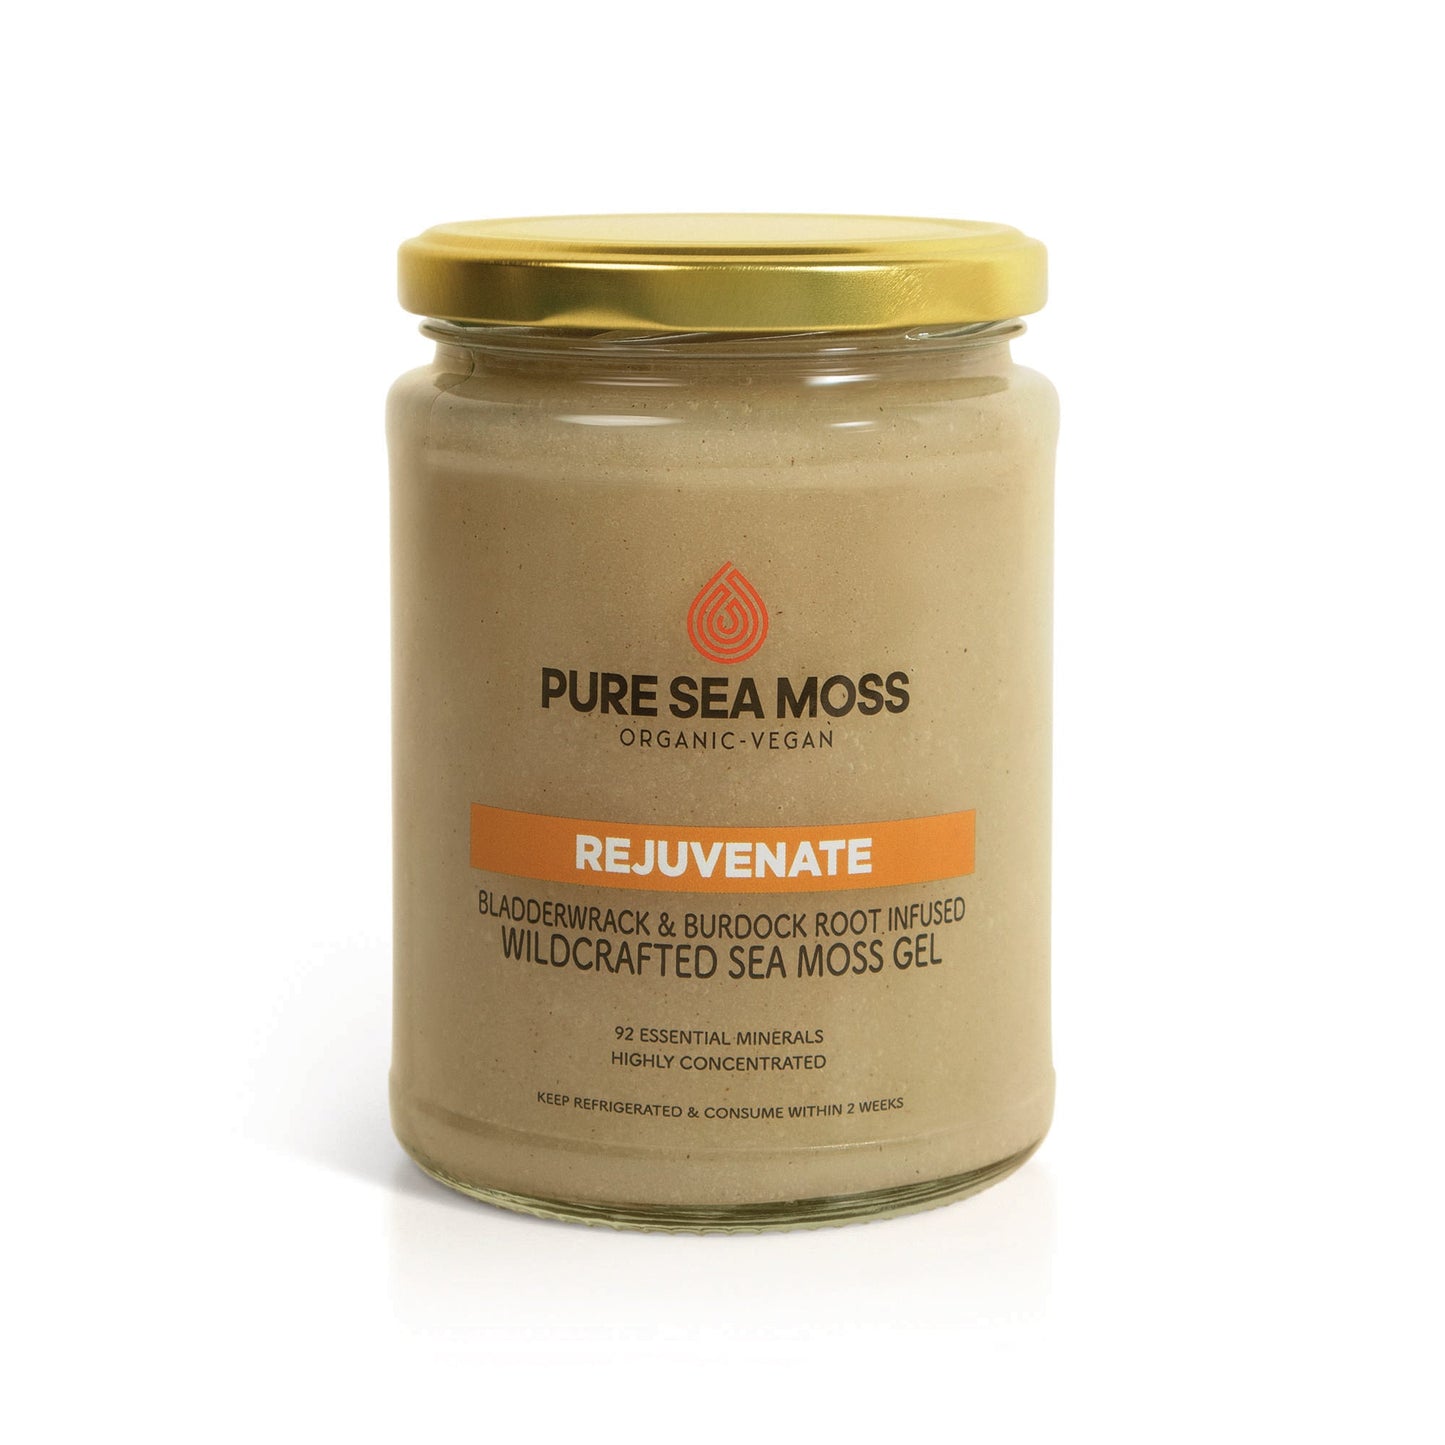 Explore the benefits of Bladderwrack and Burdock Root Infused With Sea Moss